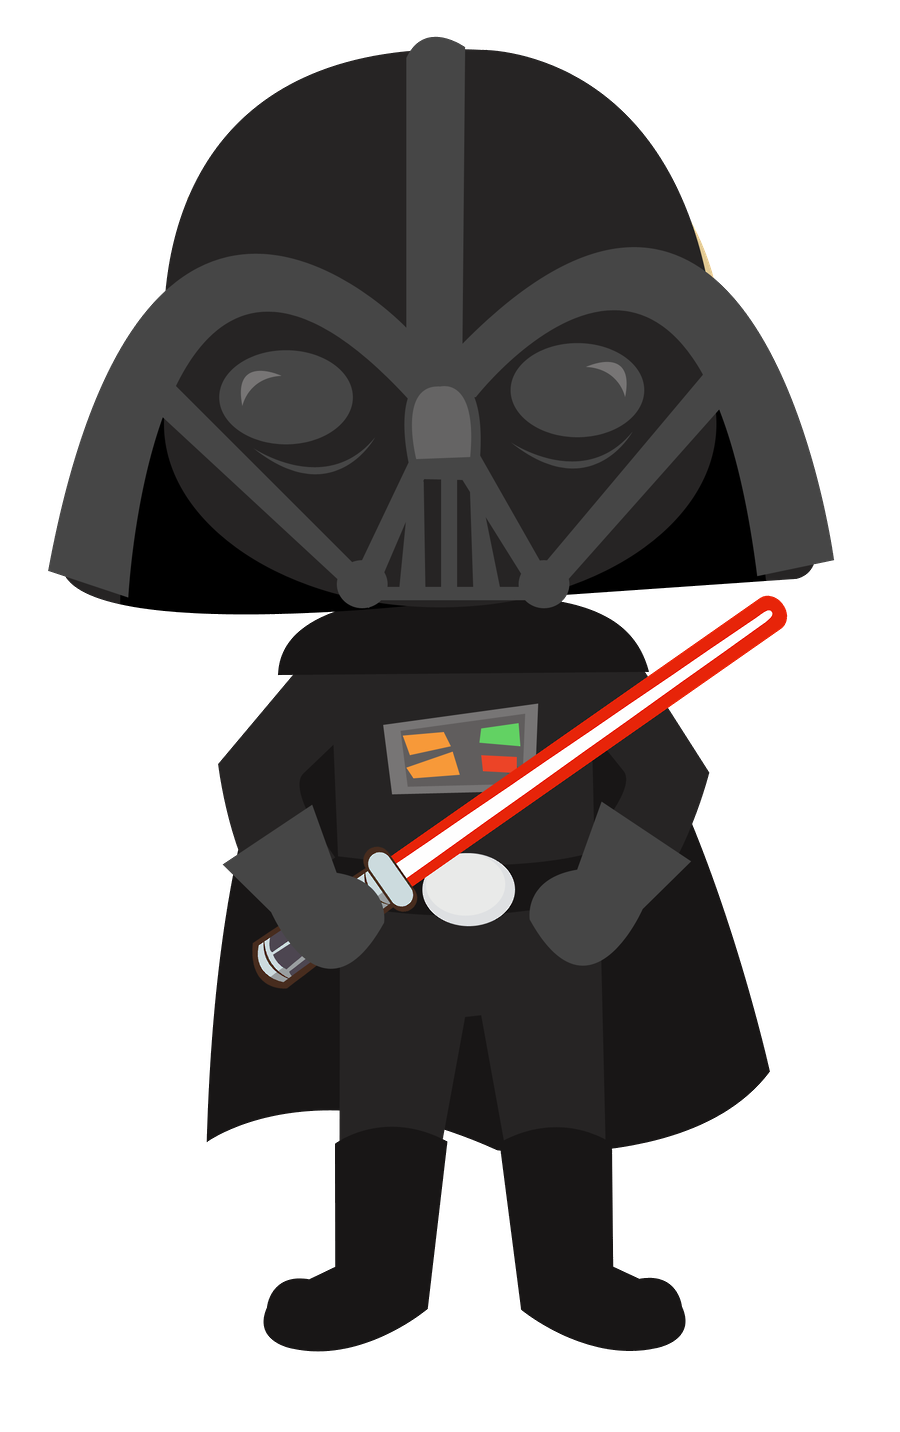 Free Darth Vader Clipart, Download Free Clip Art, Free Clip Art on